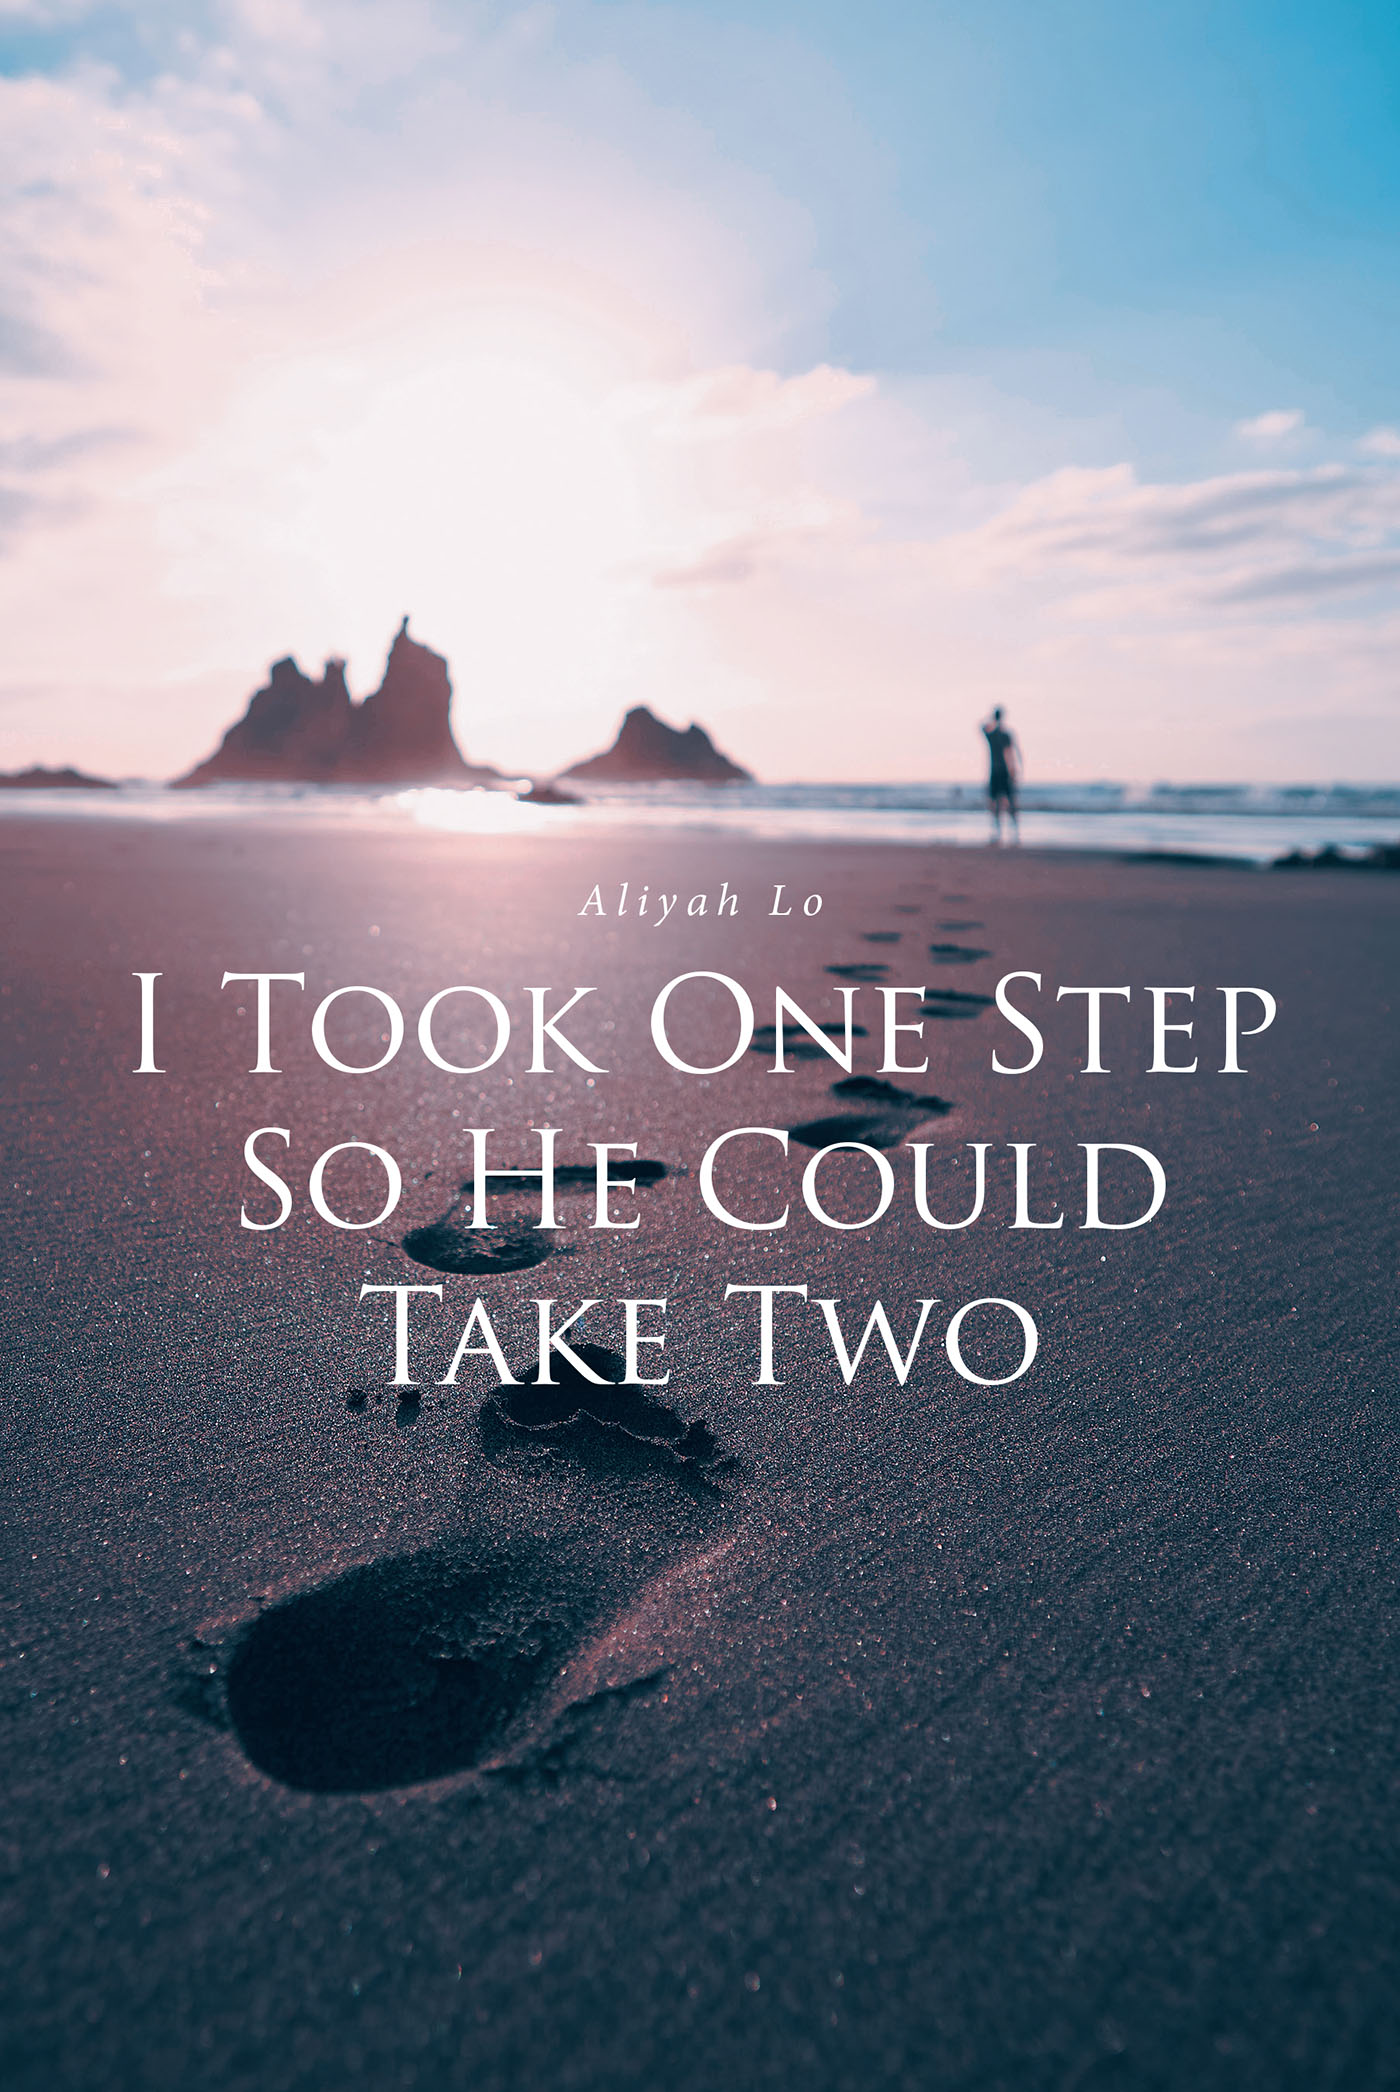 Author Aliyah Lo’s New Book, “I Took One Step So He Could Take Two,” is a Powerful Journey of How the Lord Helped Carry the Author Through Life's Difficult Moments